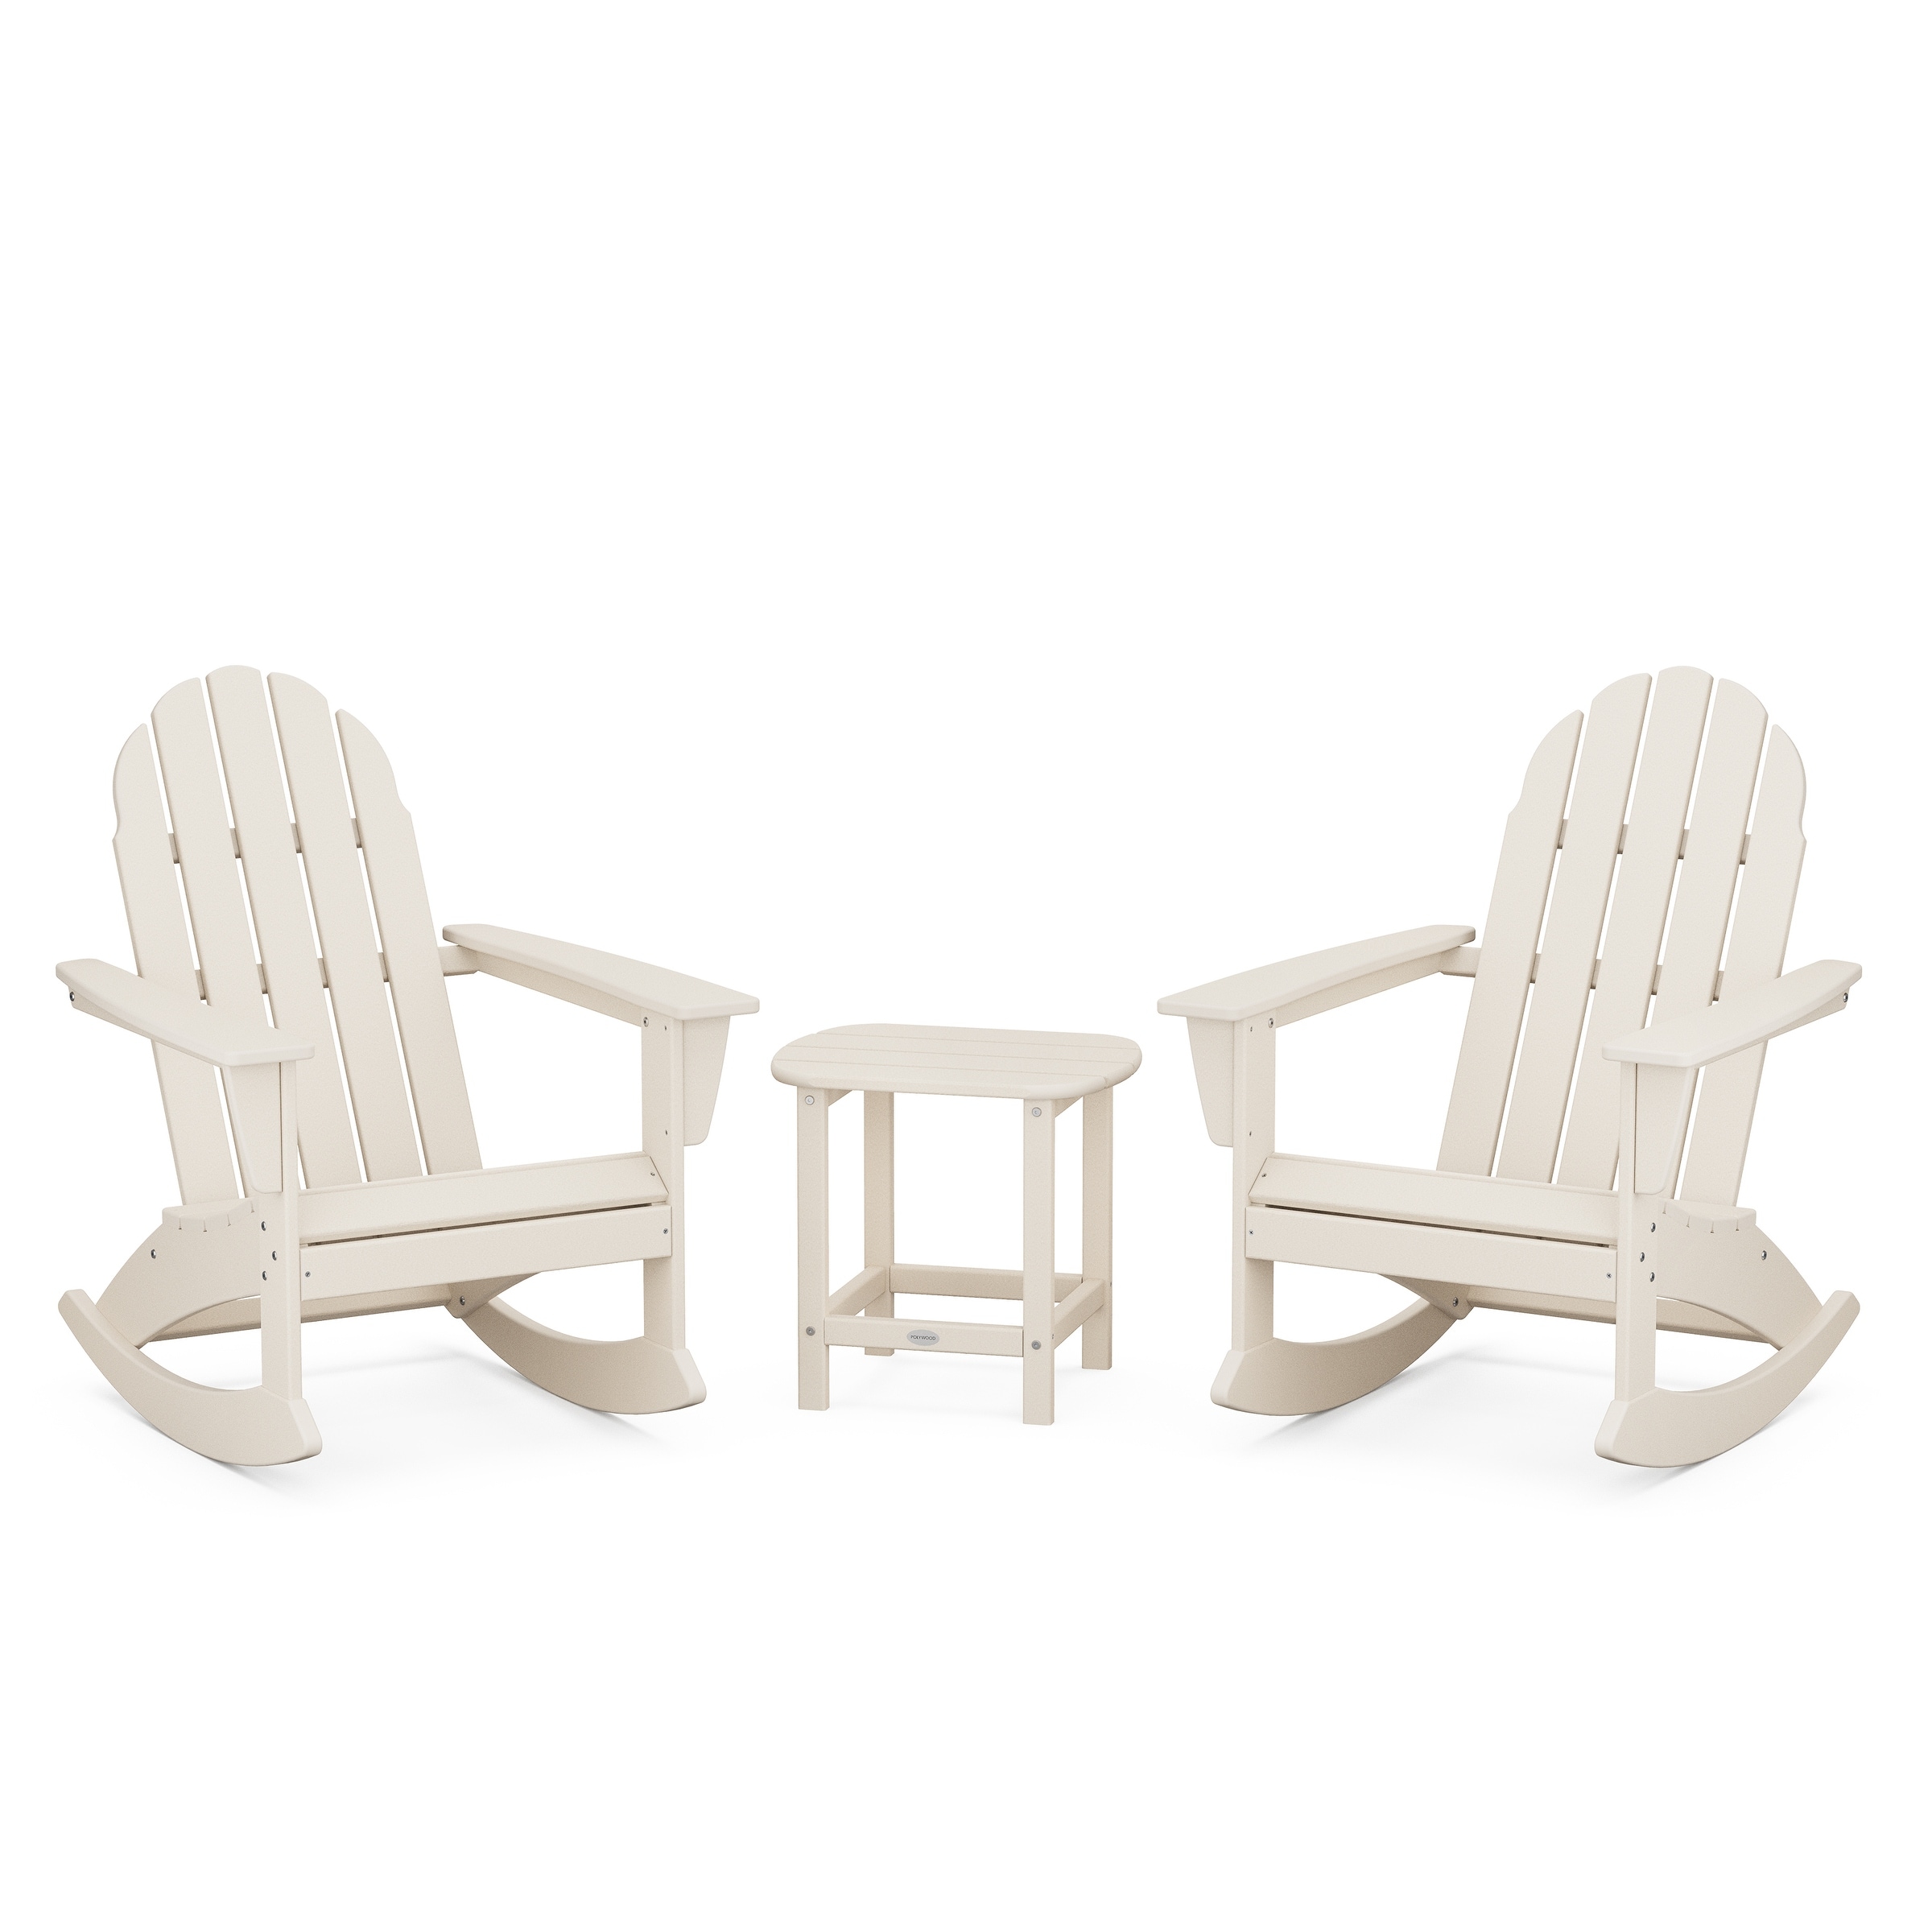 Polywood Vineyard 3-piece Adirondack Rocking Chair Set With South Beach 18 Side Table